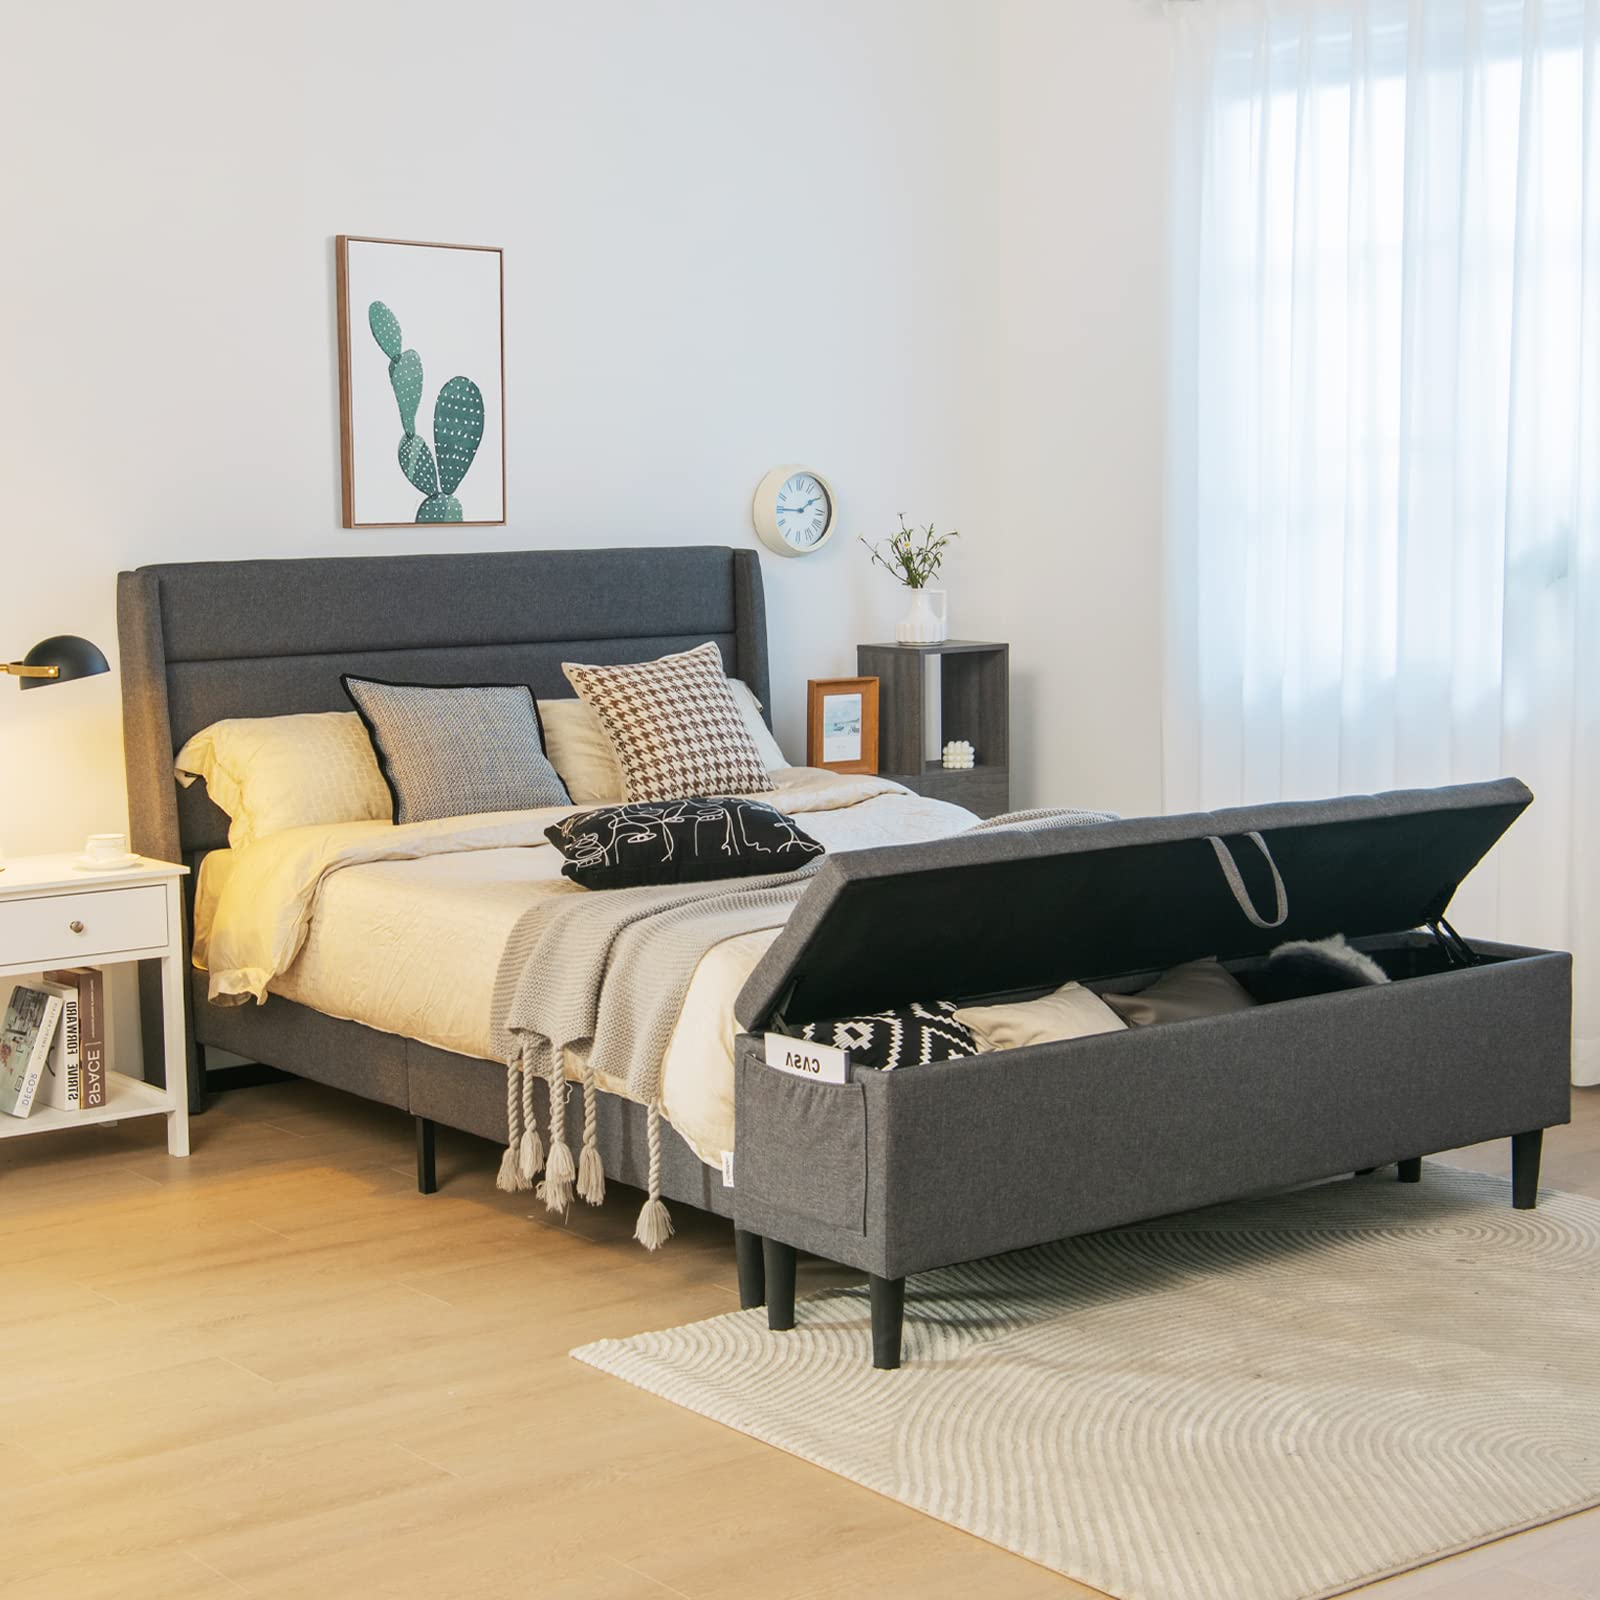 Giantex Bed Frame with Storage Ottoman